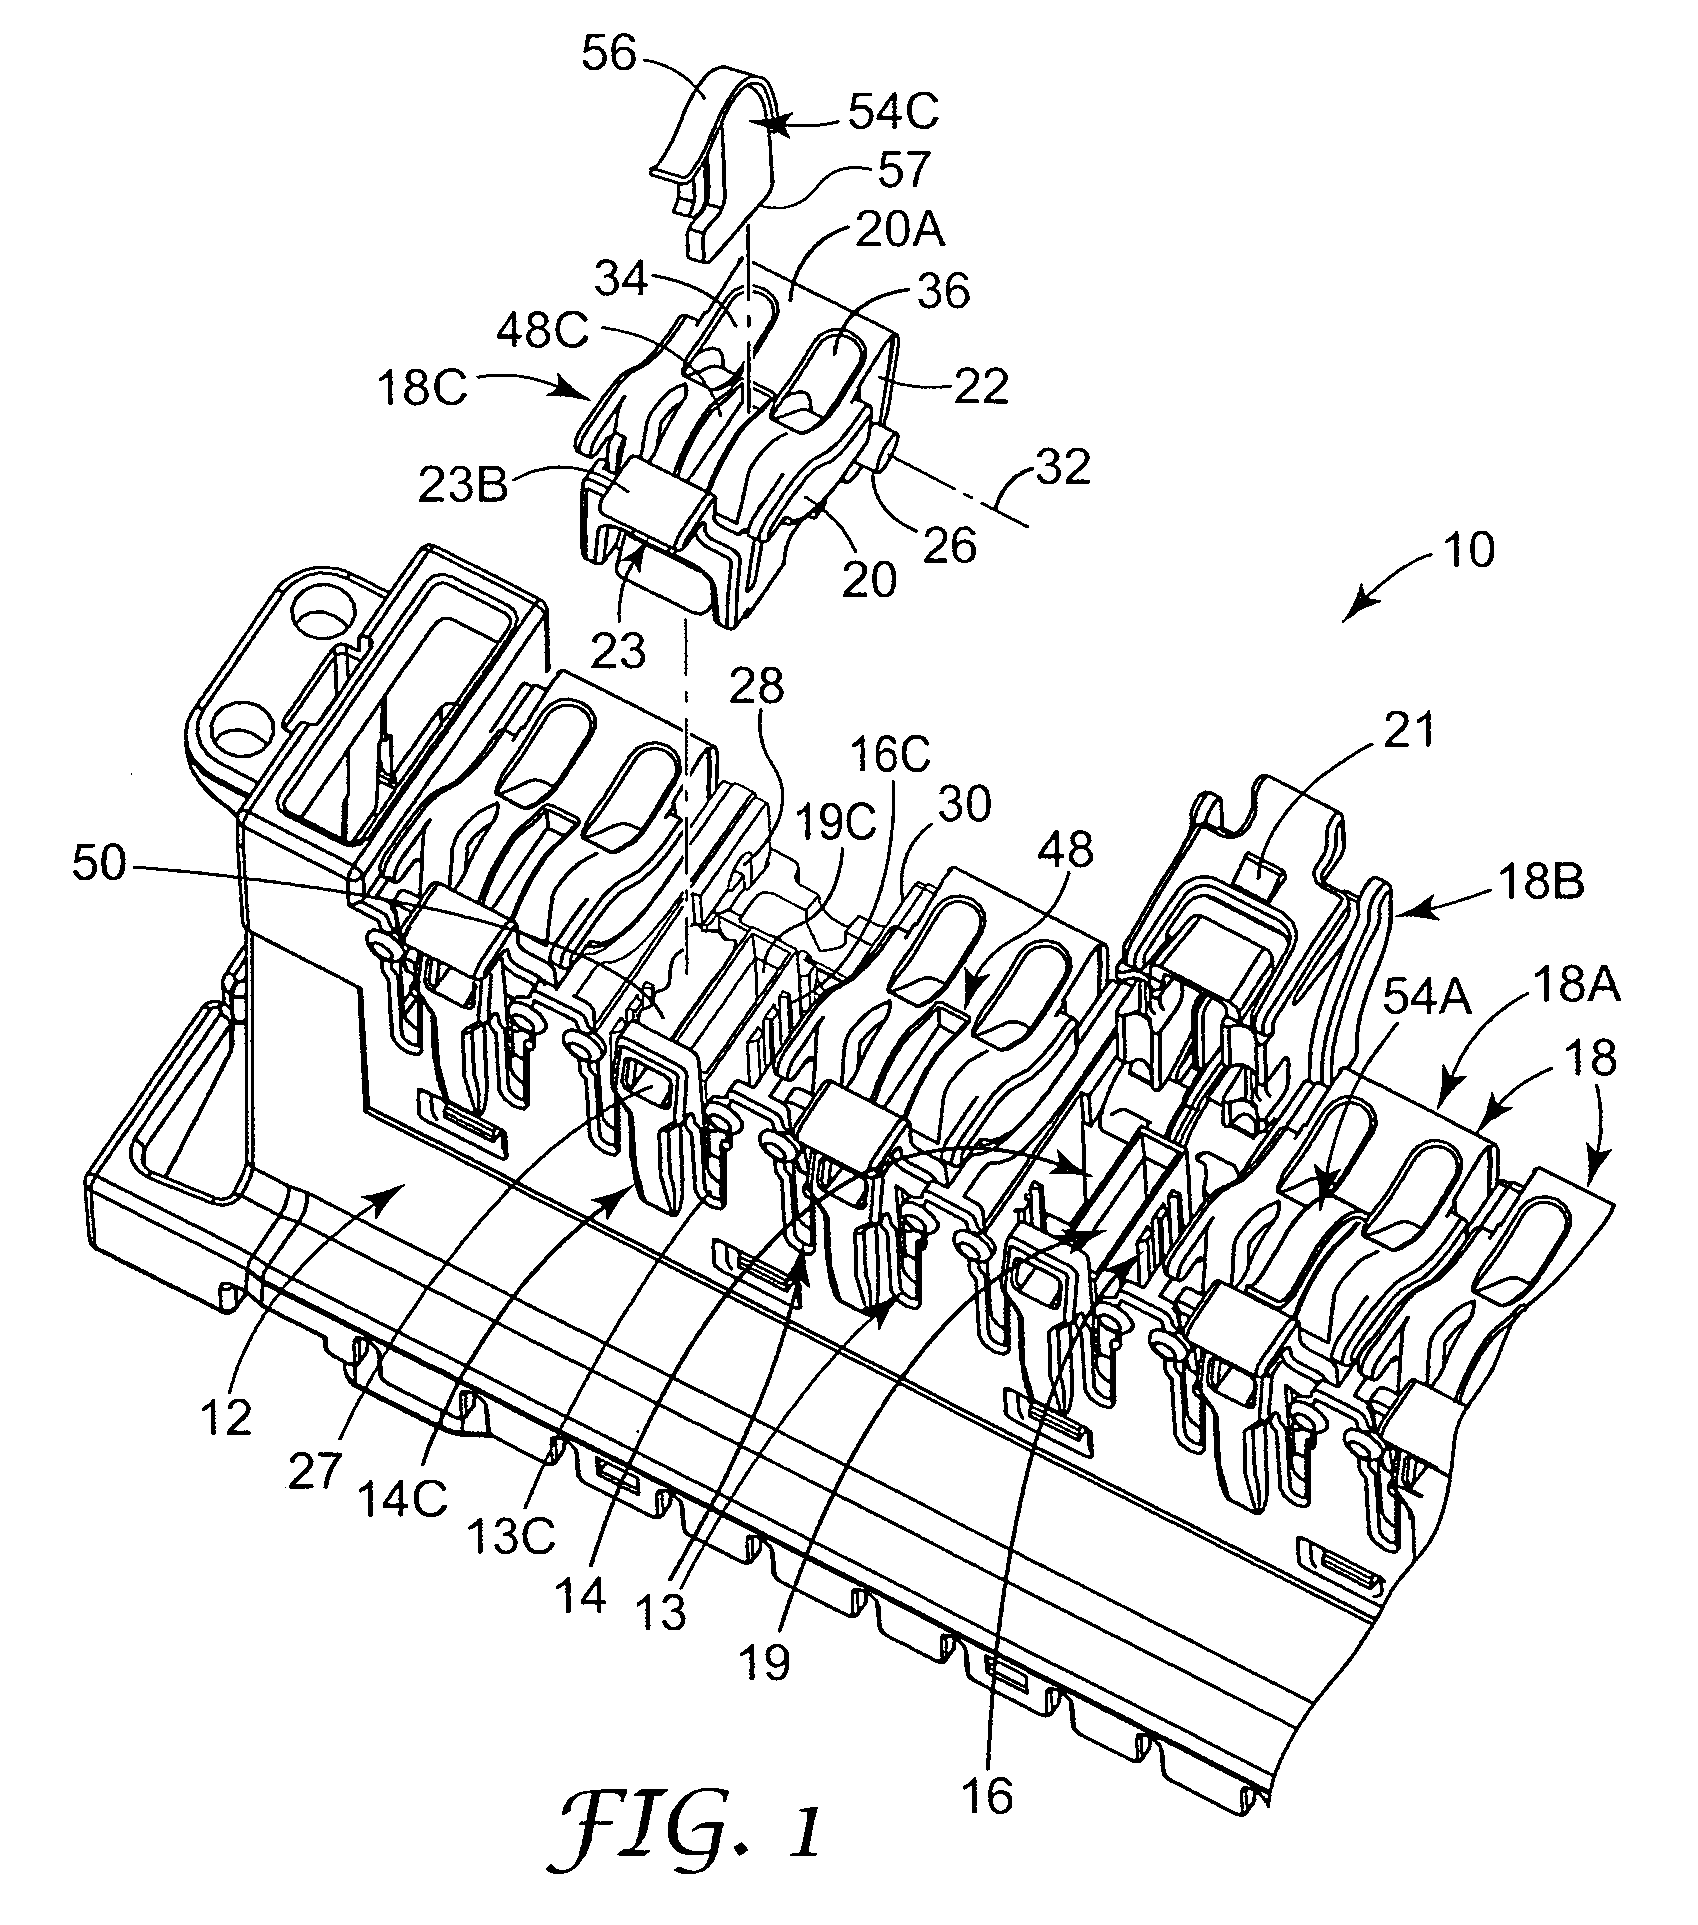 Access cover configured to receive a testing device